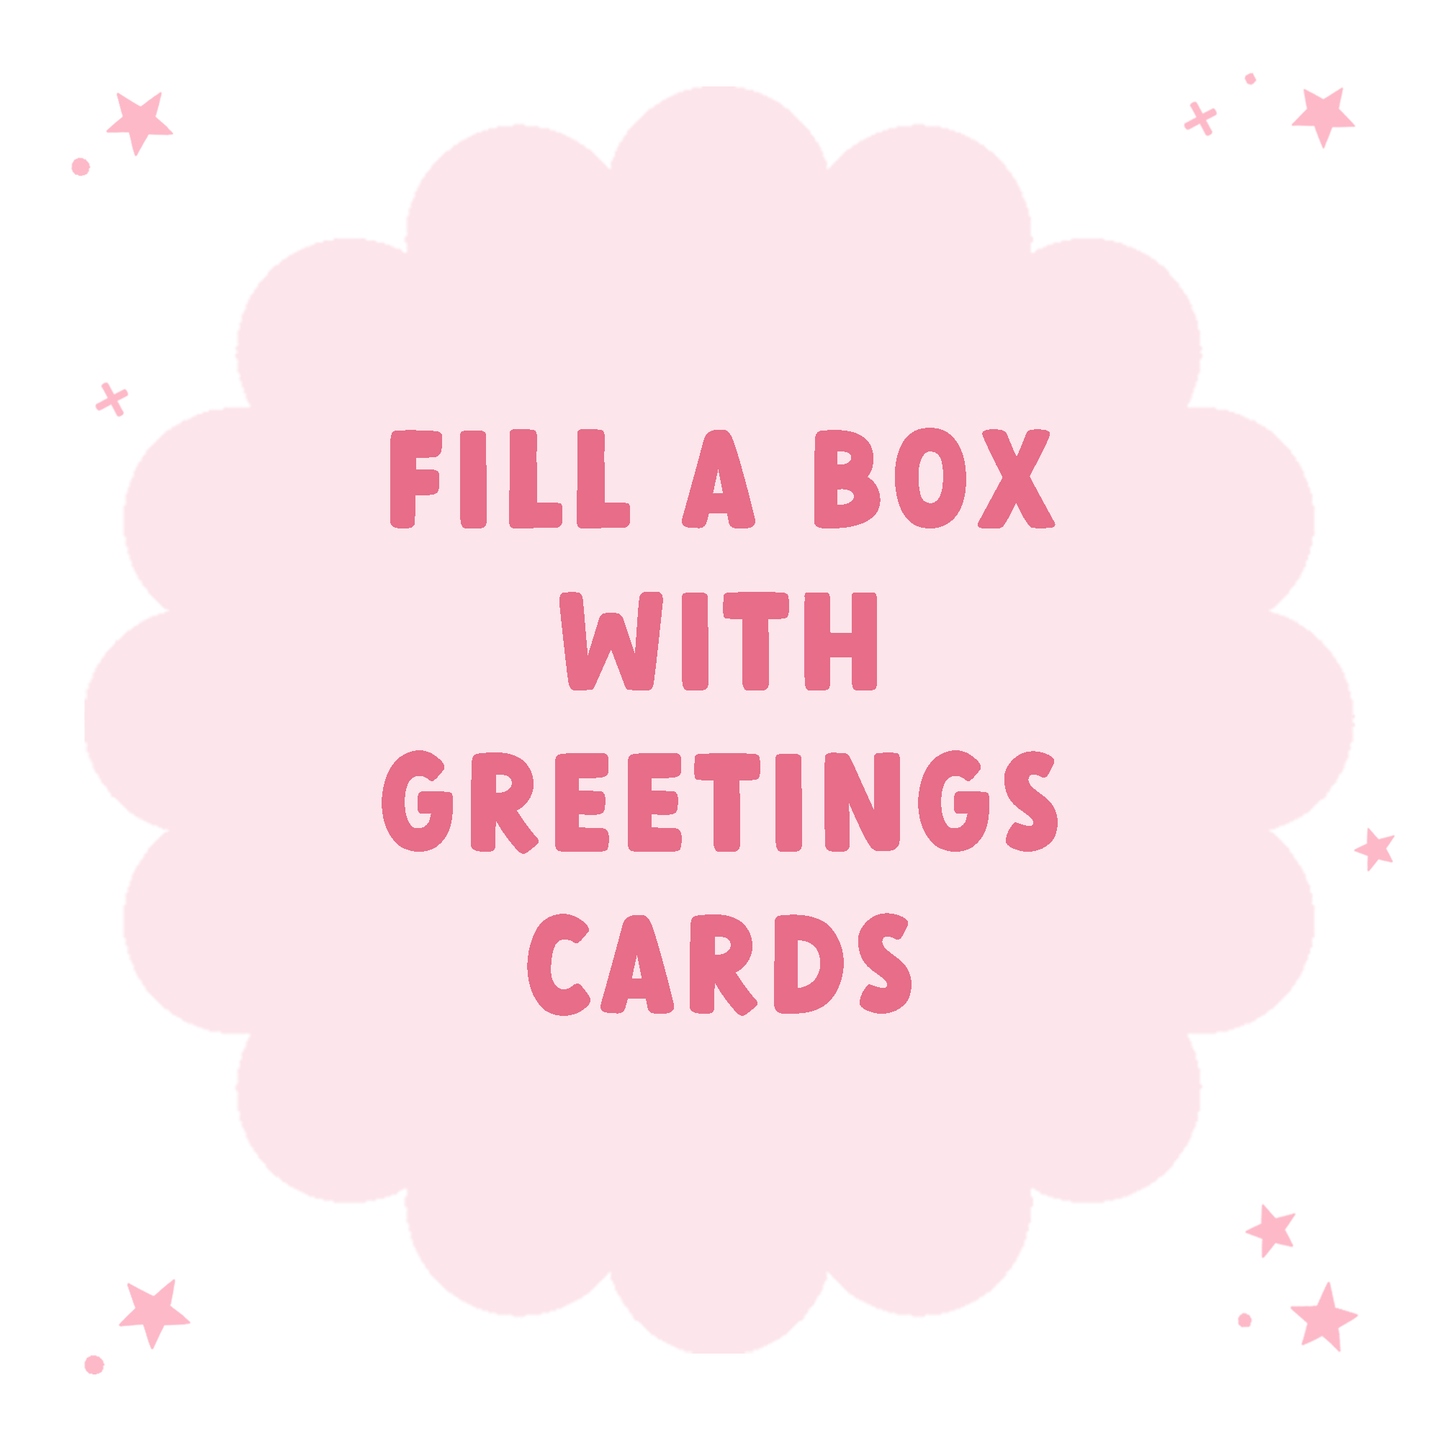 Fill A Box - Greetings Cards Bundle